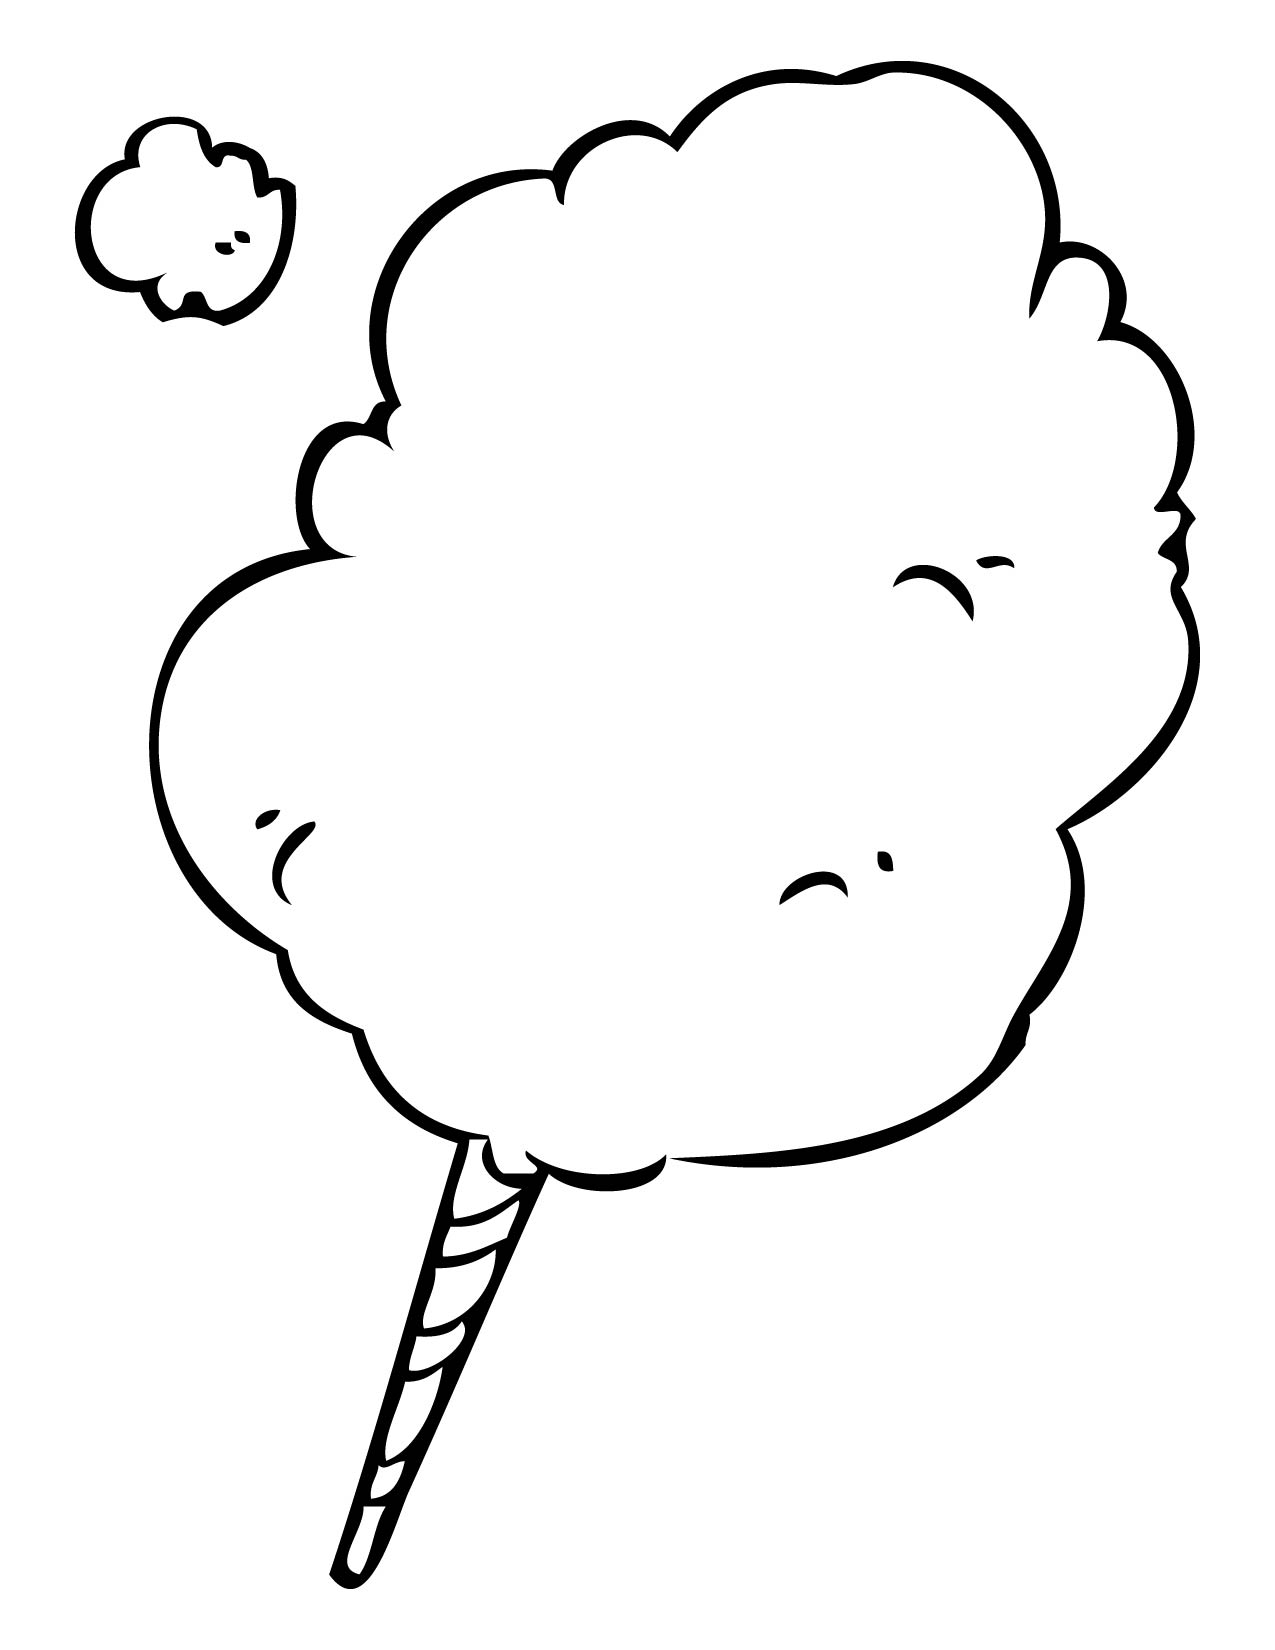 Cotton candy clipart black and white free